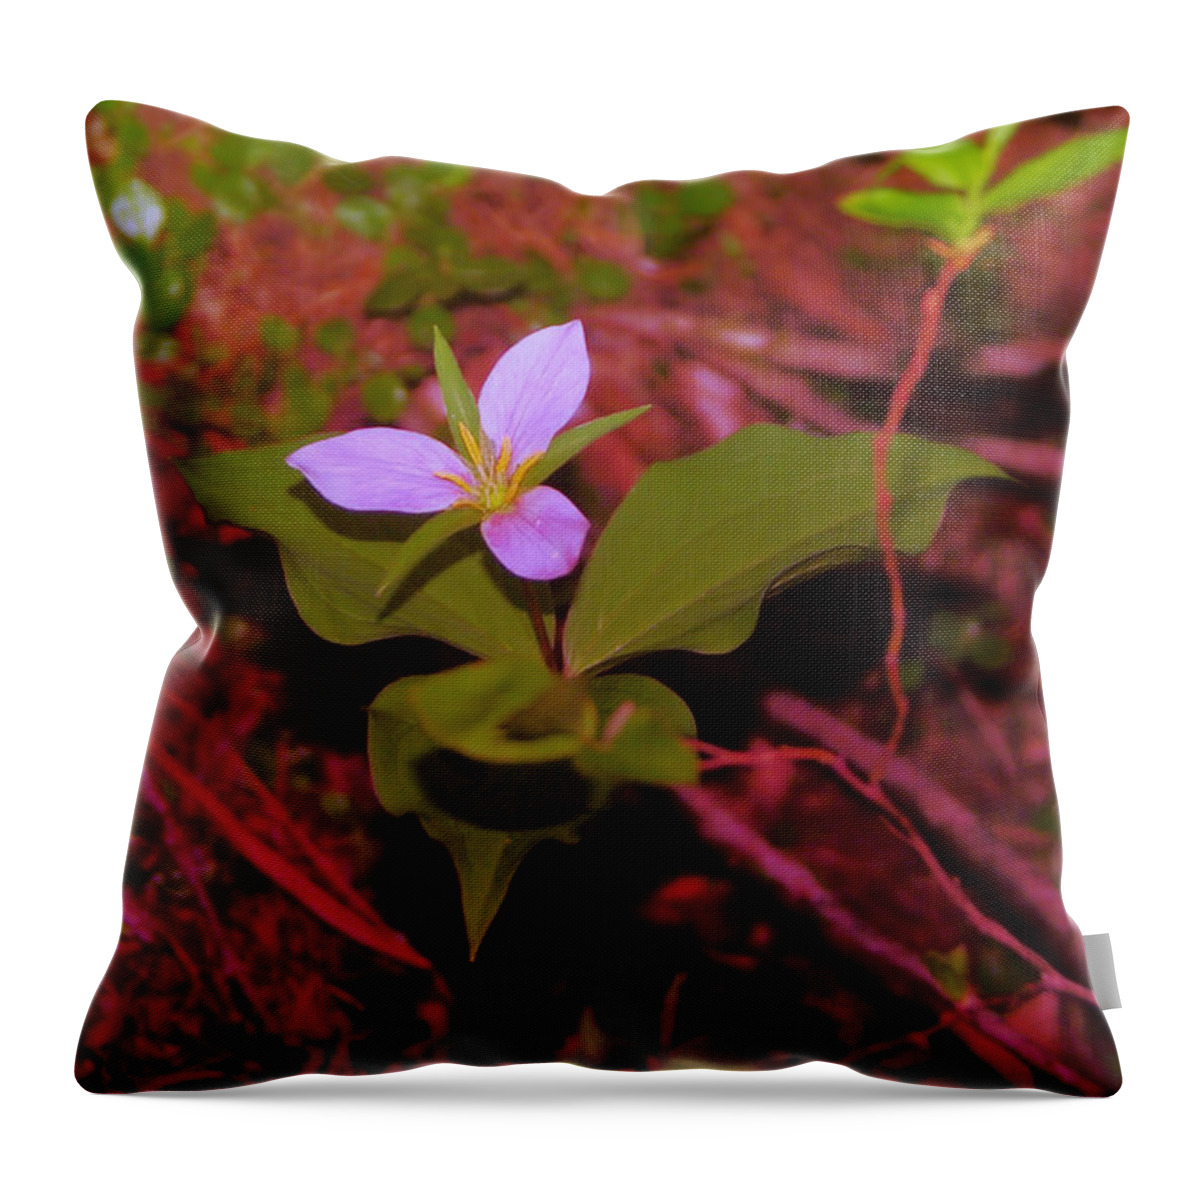 Flowers Throw Pillow featuring the photograph Trilliam by Jeff Swan